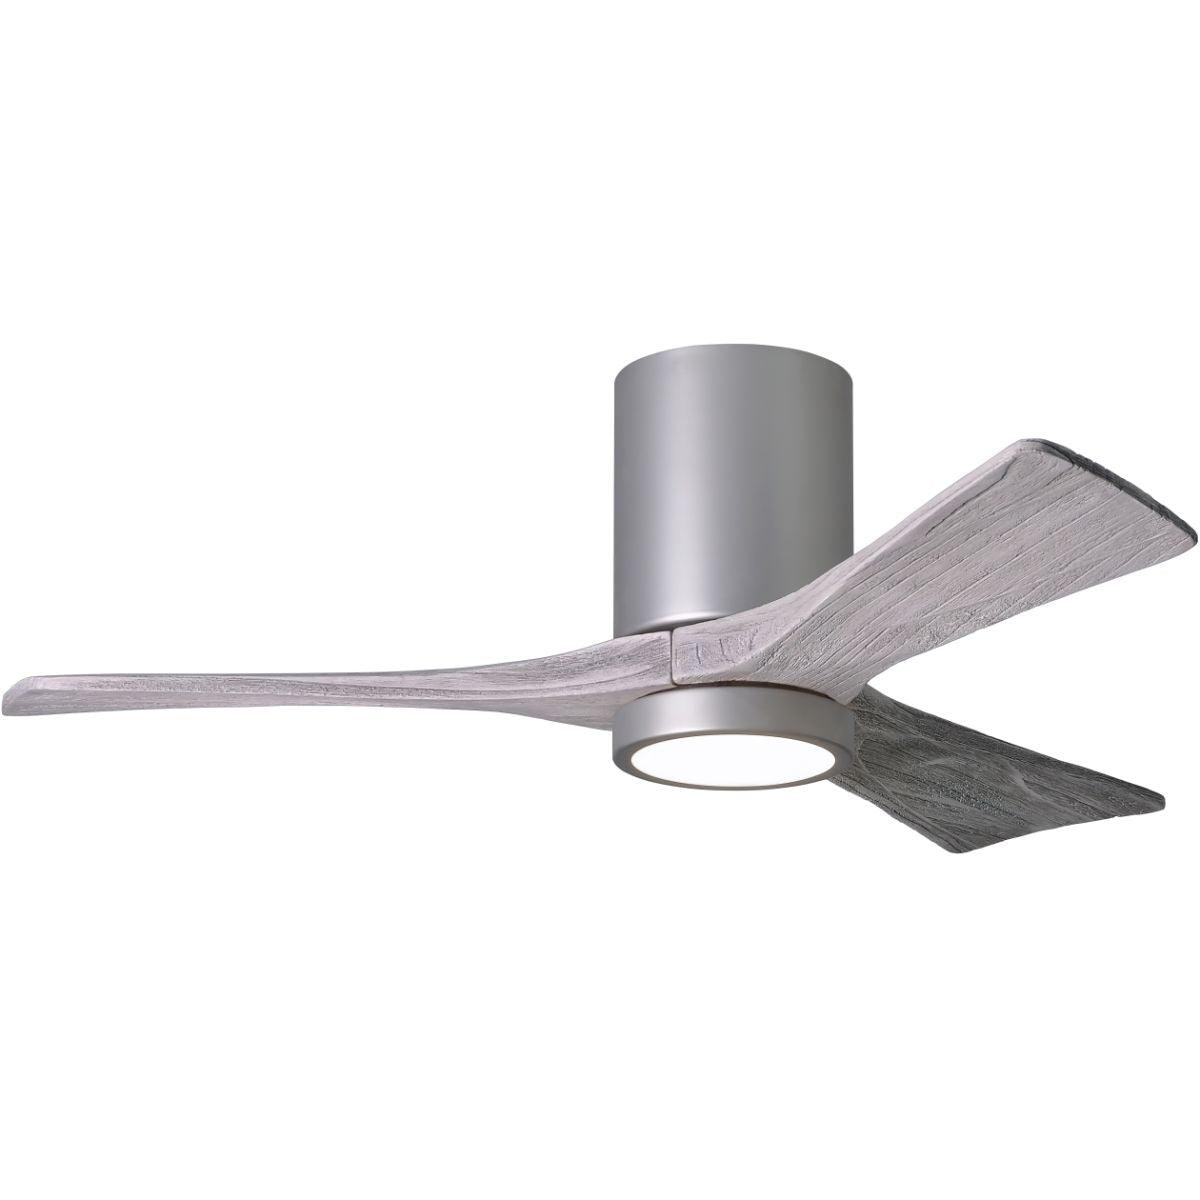 Irene 42 Inch Low Profile Outdoor Ceiling Fan With Light, Wall And Remote Control Included - Bees Lighting